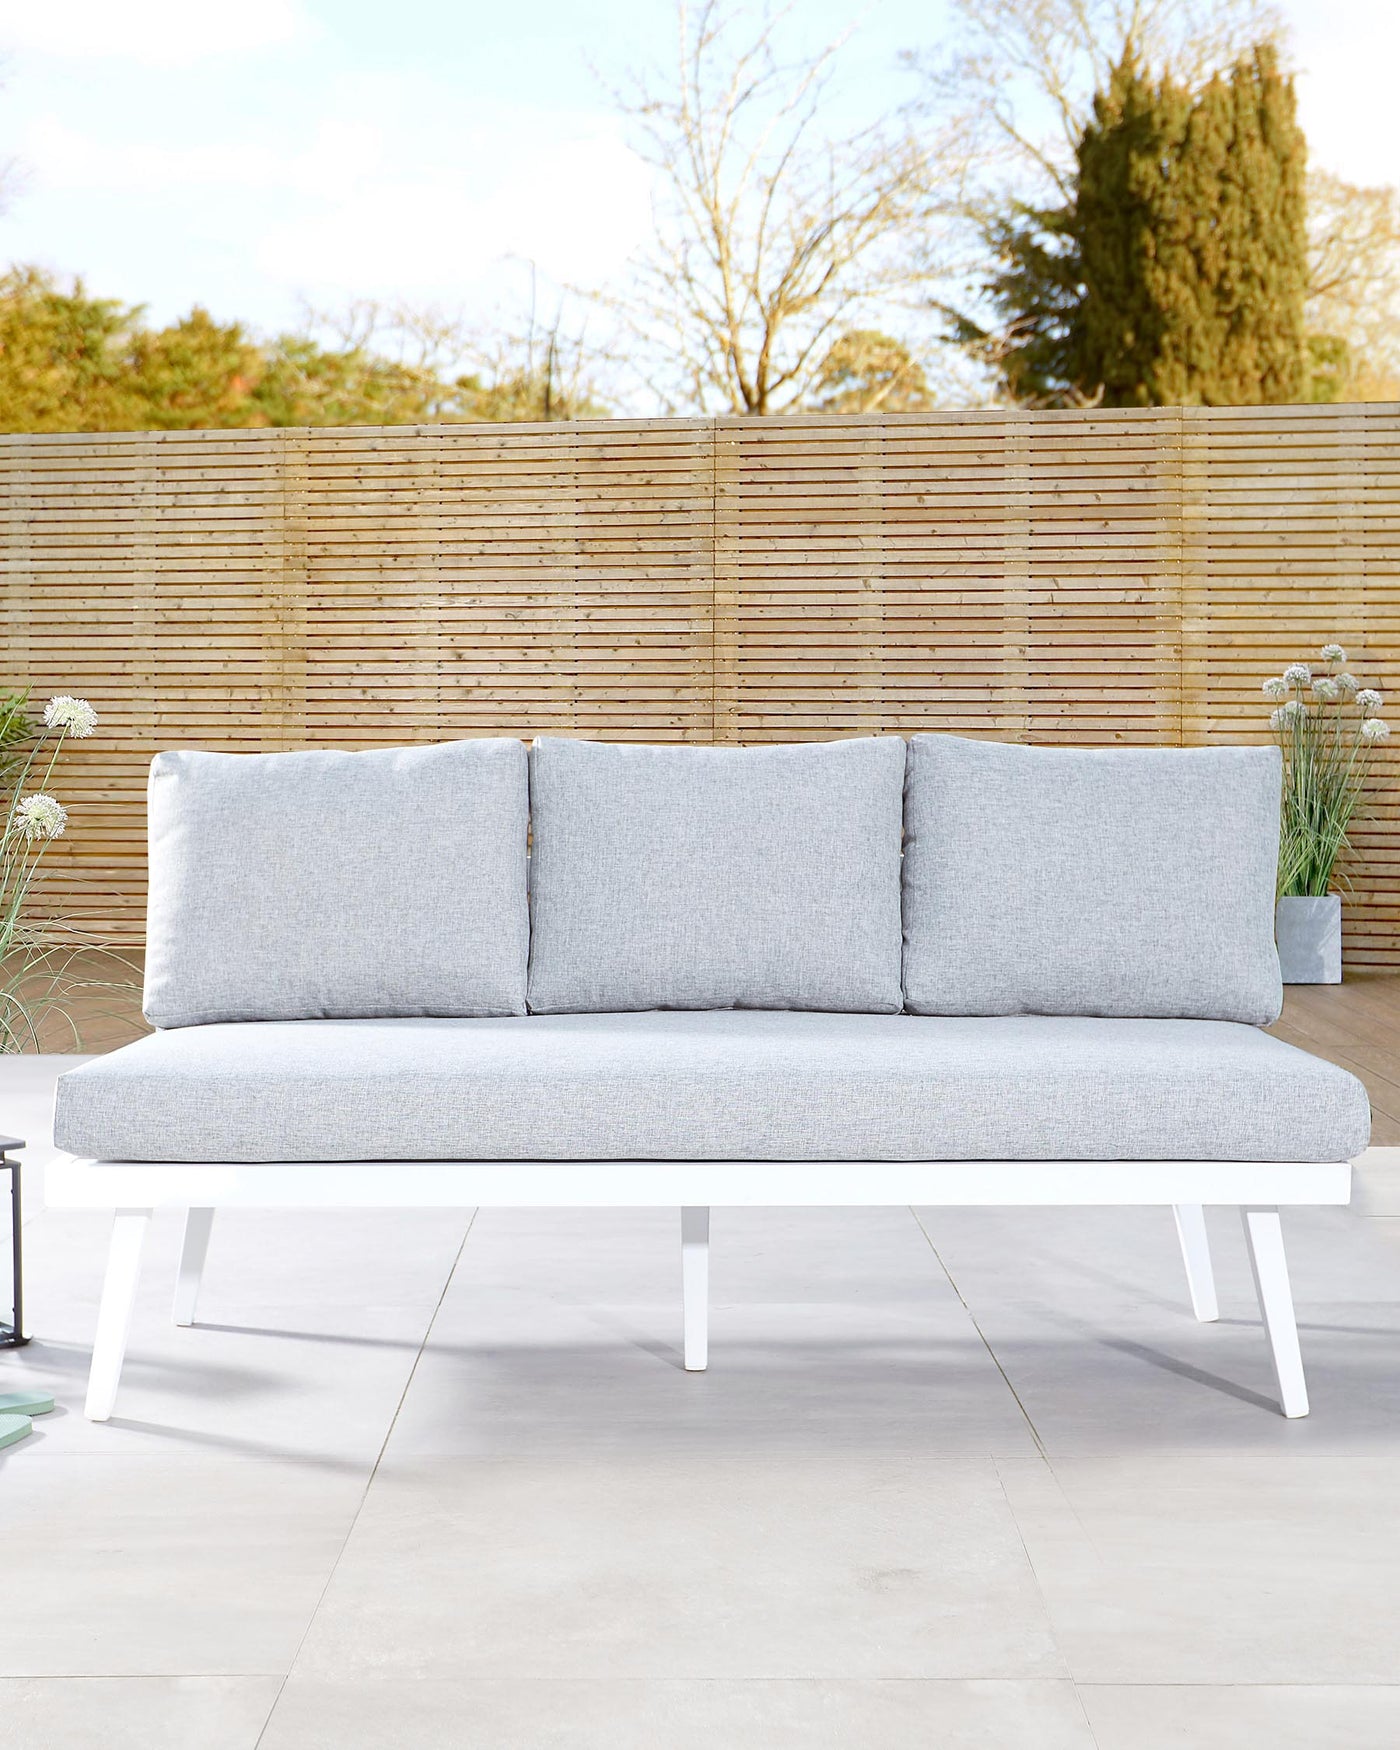 rio white 6 seater with palermo white bench outdoor dining set